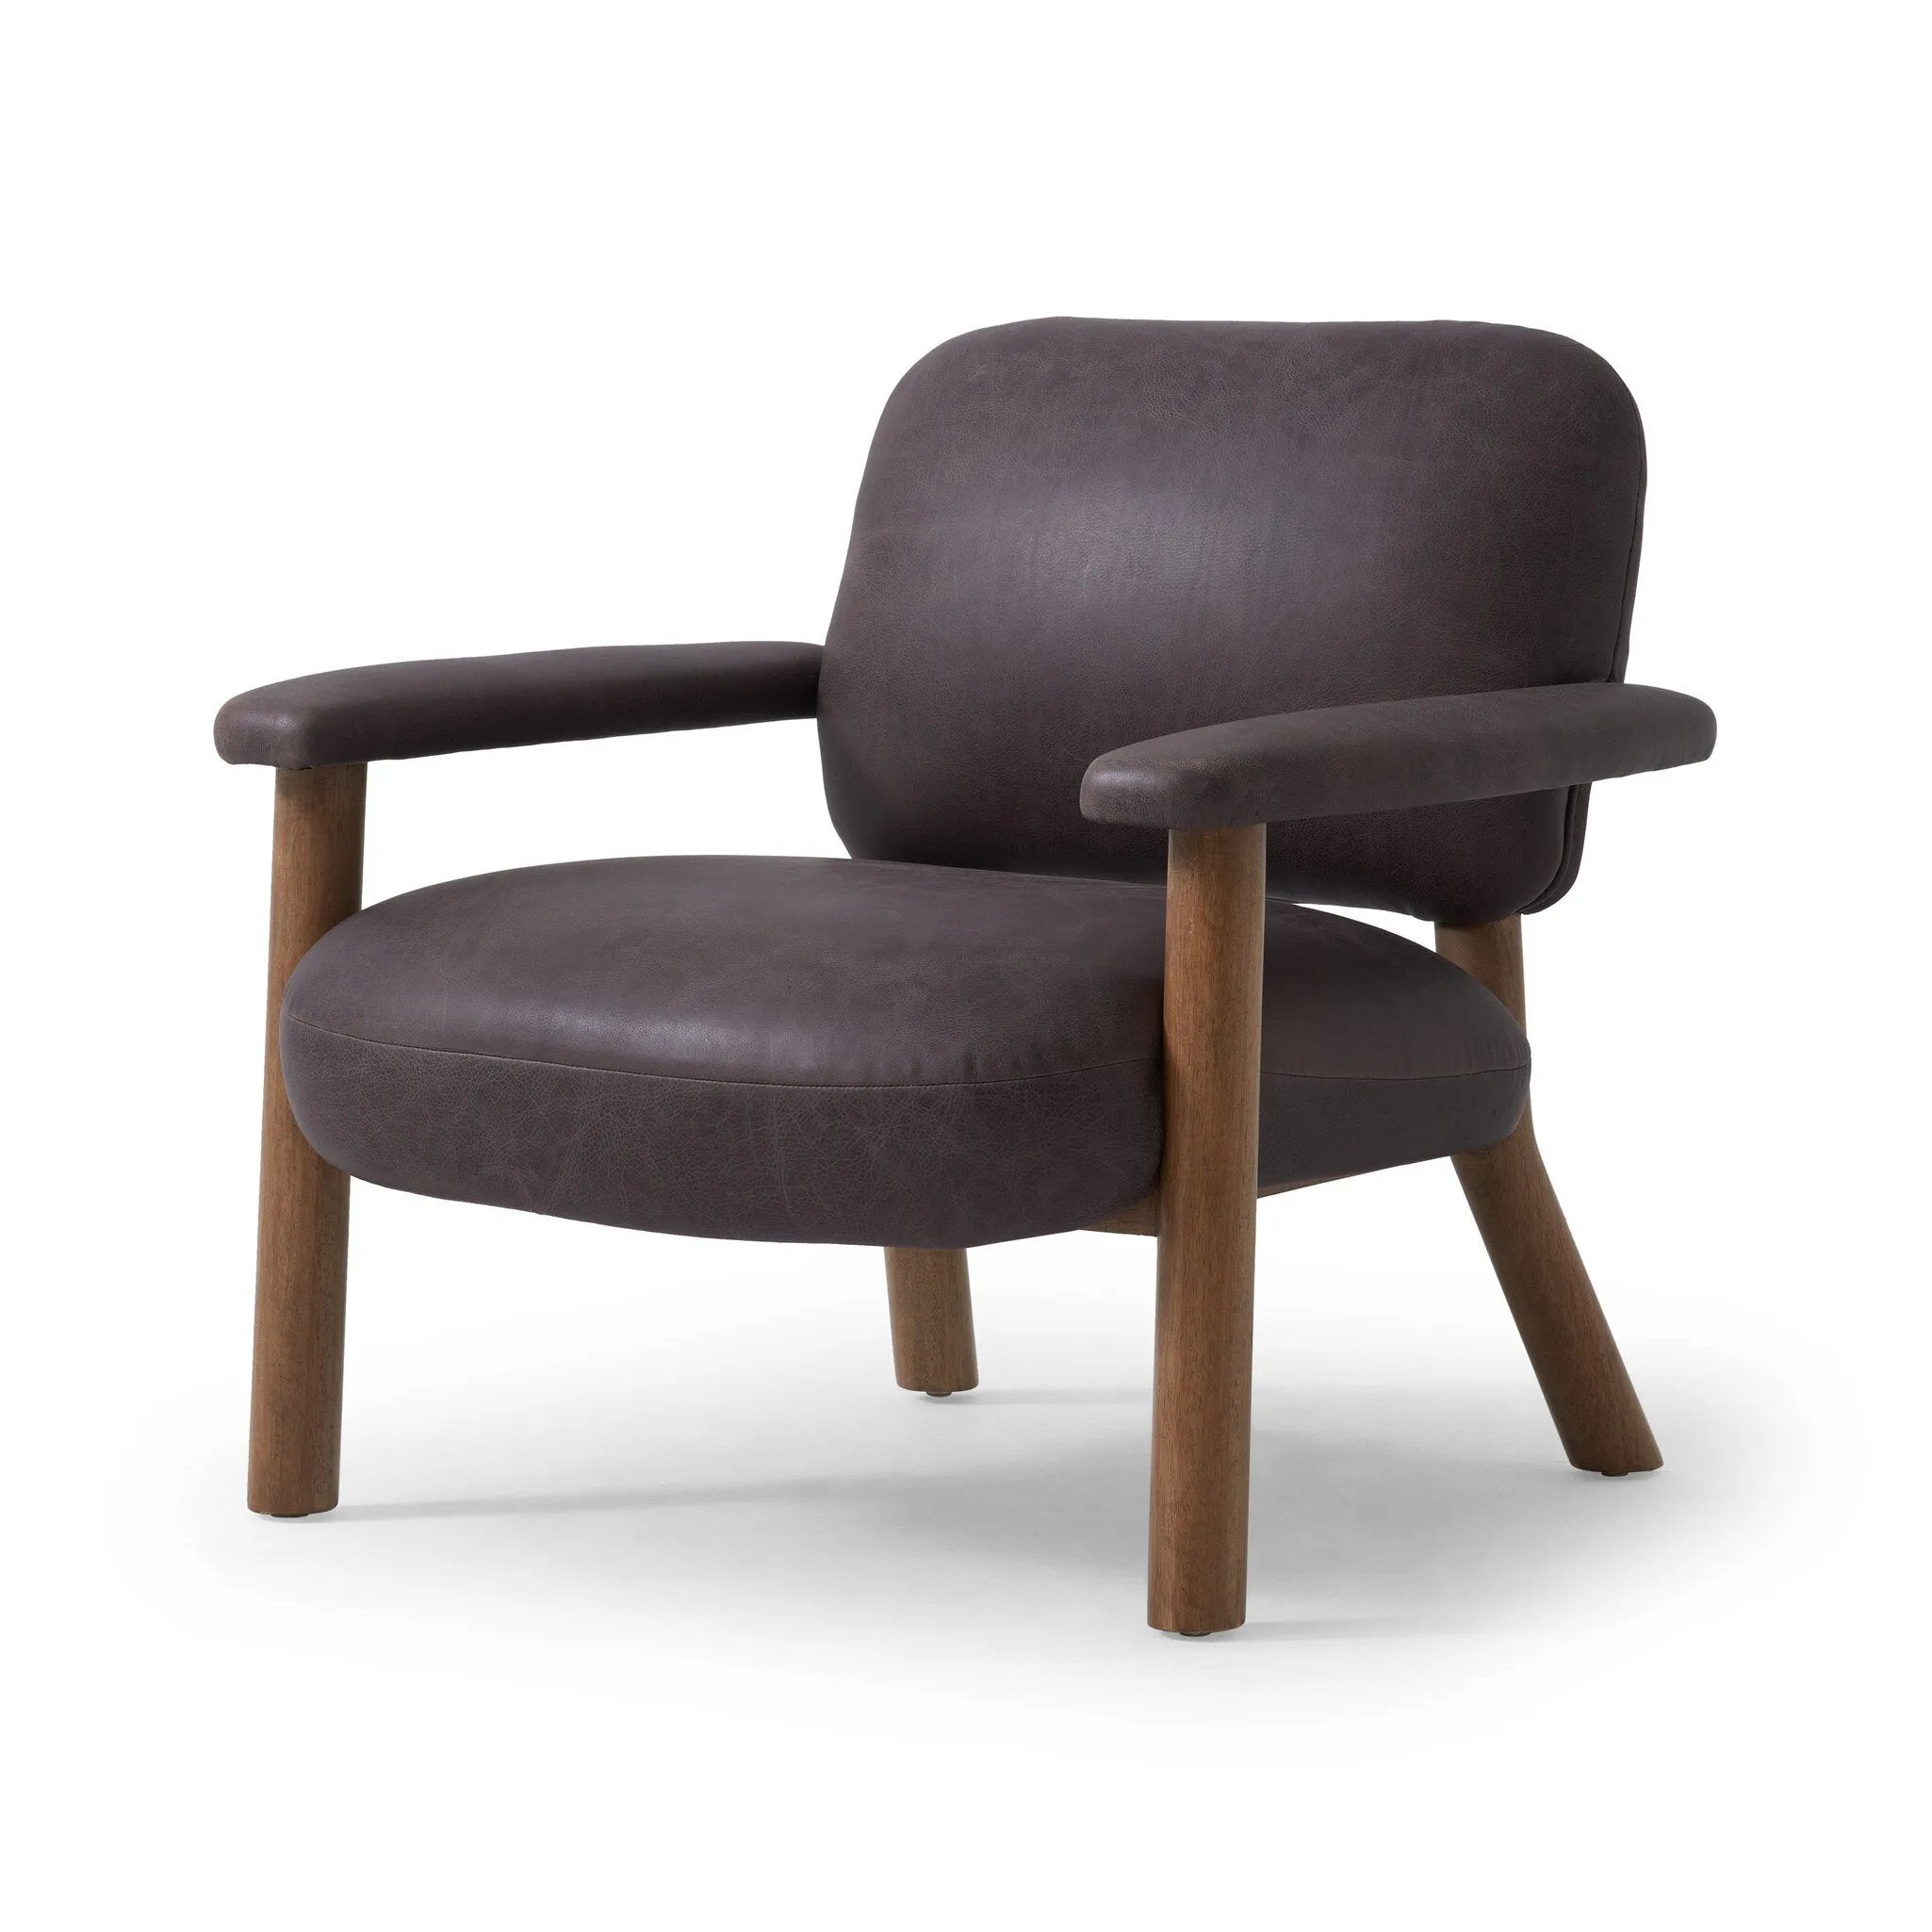 Sleek and inviting, this wood-meets-leather arm chair is timeless in any context. Large cylindrical legs support the upholstered back and seat, which are covered in bark-colored top-grain leather. Spring suspension adds comfort and durability to the seat cushion.Collection: Carnegi Amethyst Home provides interior design, new home construction design consulting, vintage area rugs, and lighting in the Seattle metro area.